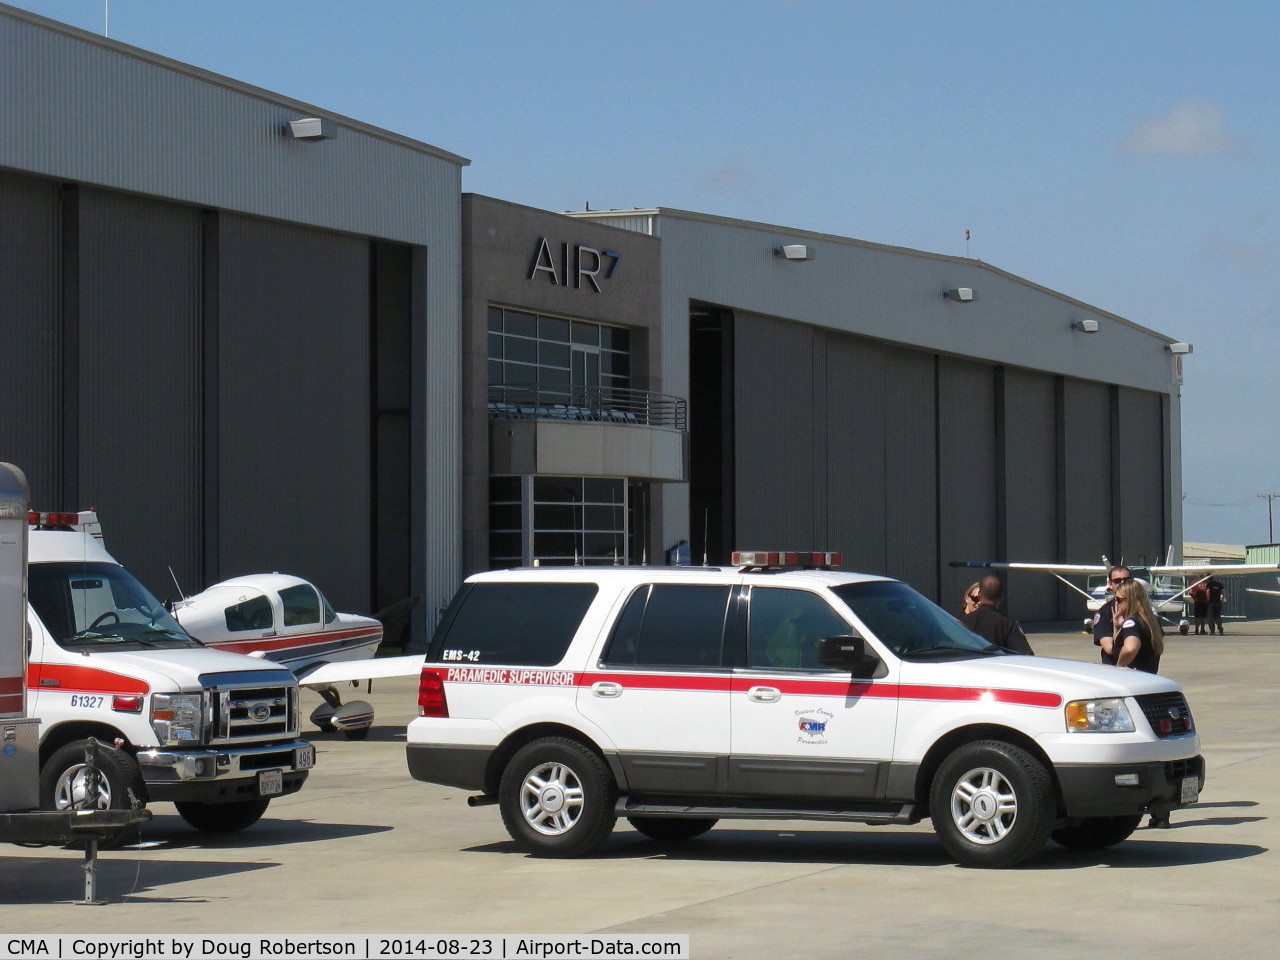 Camarillo Airport (CMA) - Paramedic Vehicles at Air7 ramp-centrally dispatched for CMA Annual Airshow if services needed